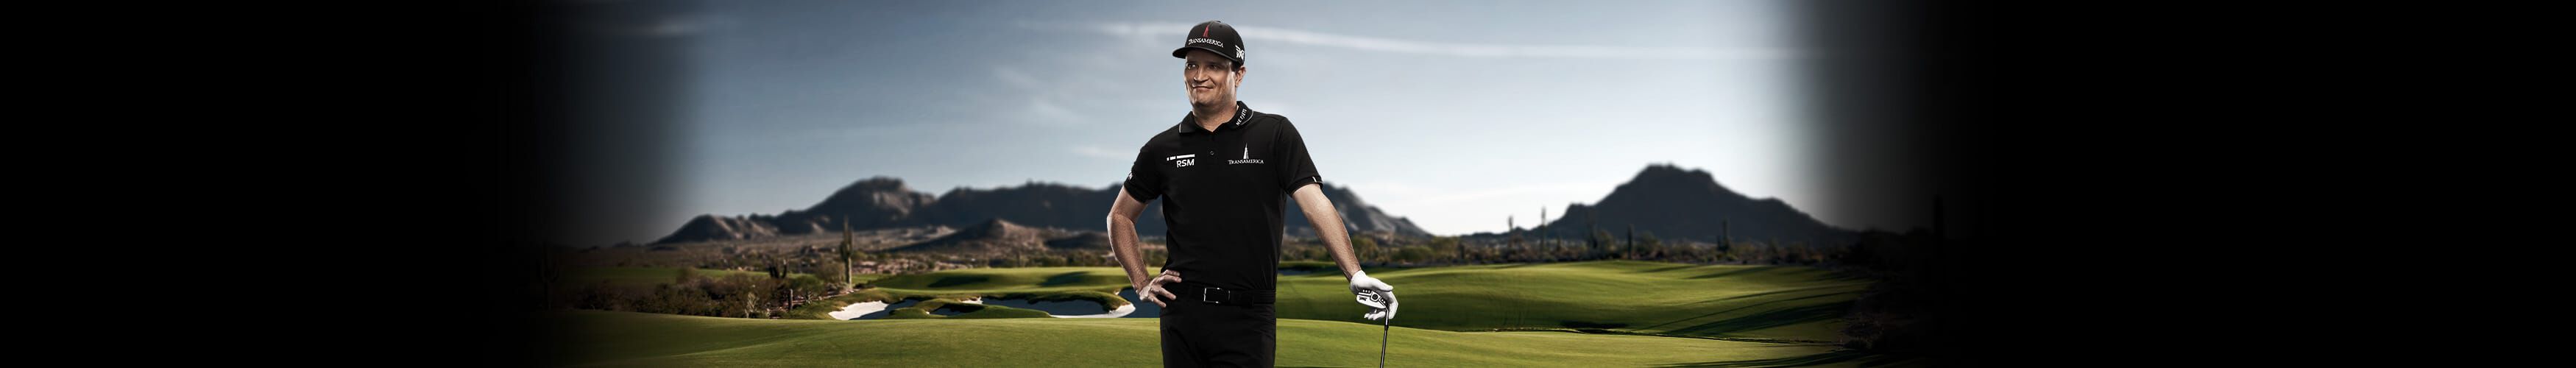 Golfer on course with PXG hat